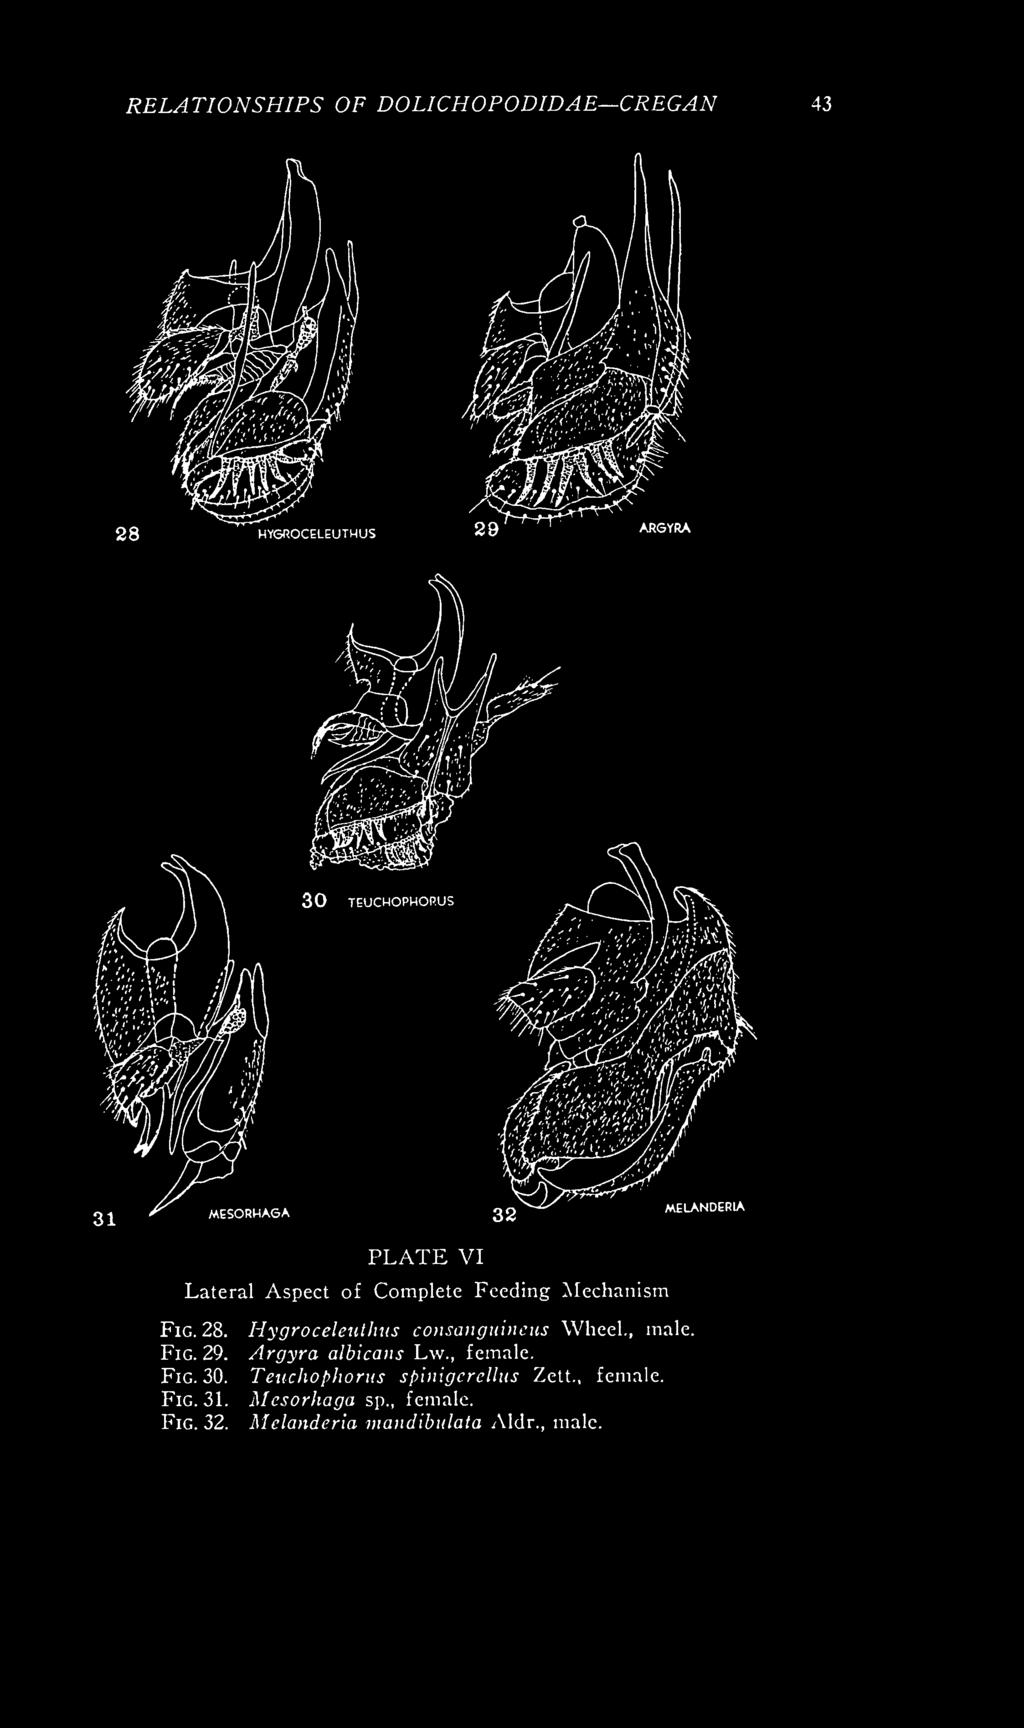 RELATIONSHIPS OF DOLICHOPODIDAE CREGAN 43 MELANDERIA PLATE VI Lateral Aspect of Complete Feeding Mechanism Fig. 28. Hygroceleuthns consanguineus Wheel., male.